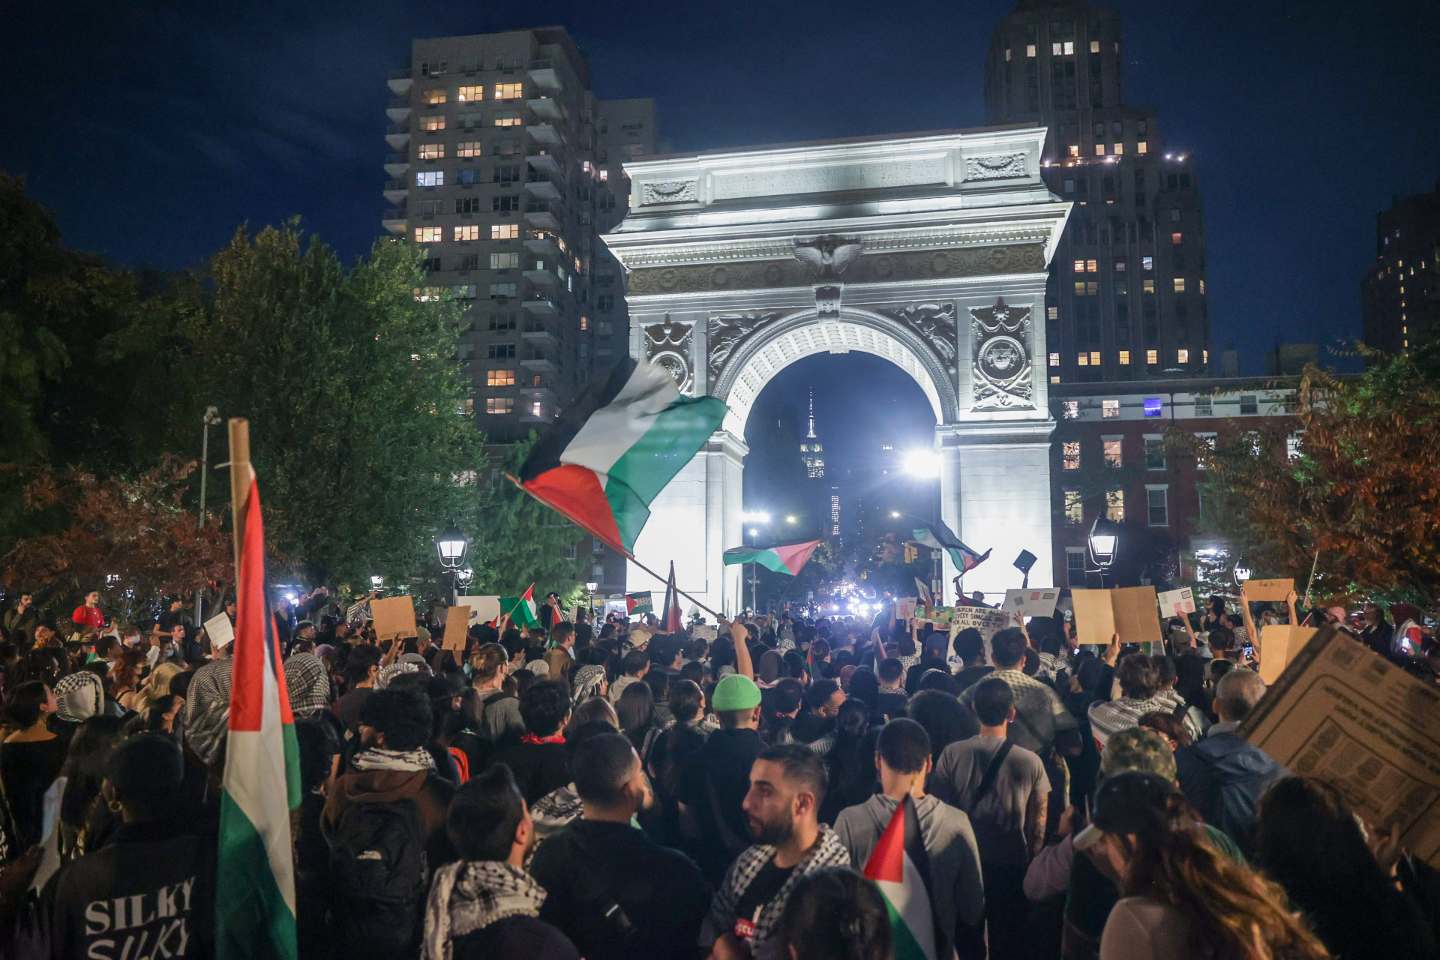 Pro-Palestinian demonstrators march with banners from Wall Street to Washington Square Park.